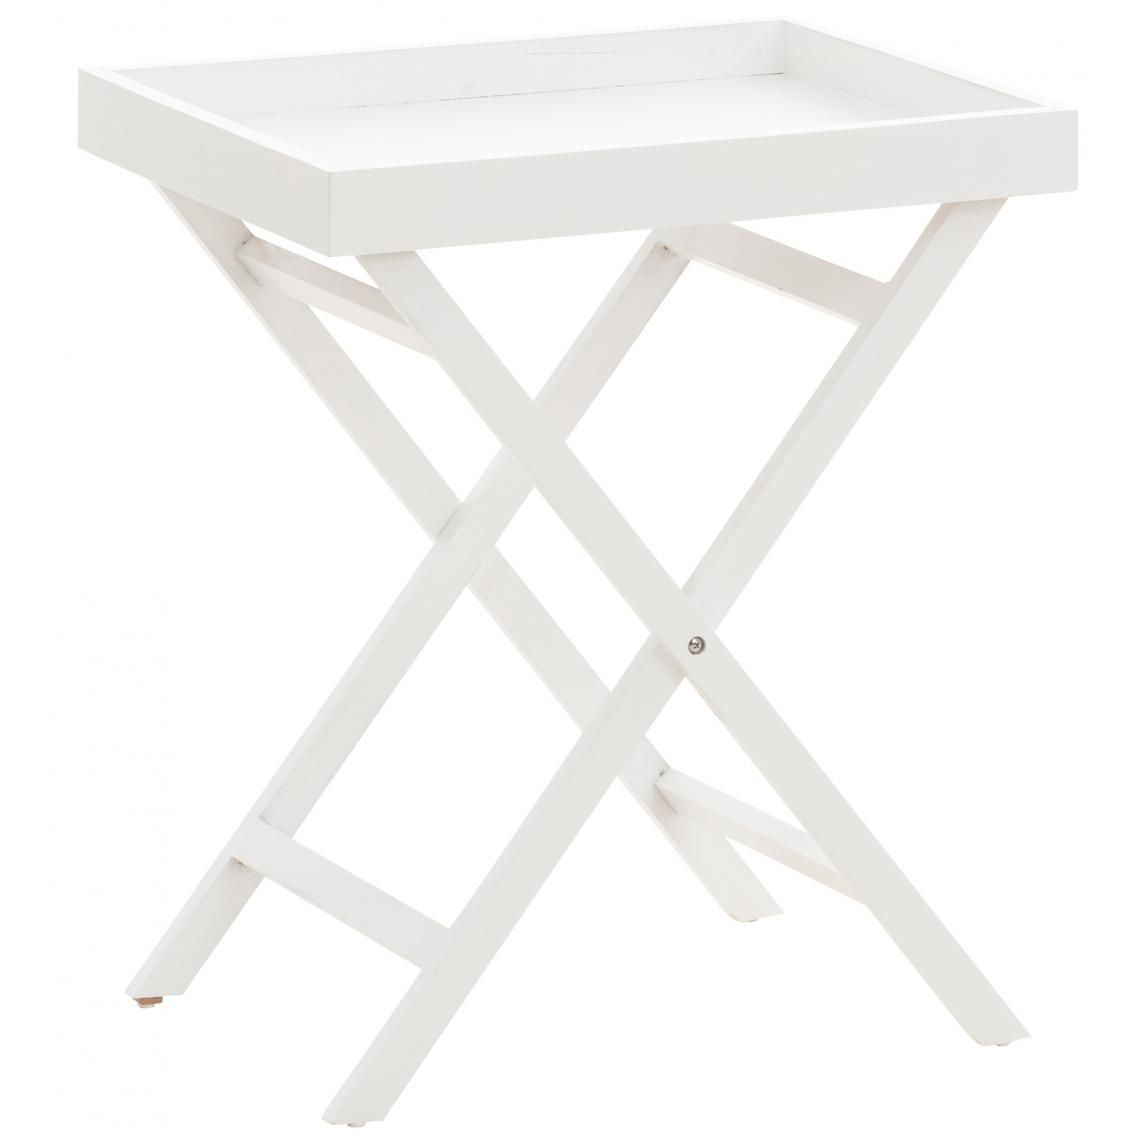 Icaverne - Inedit Table d'appoint Tokyo couleur blanc - Chaises